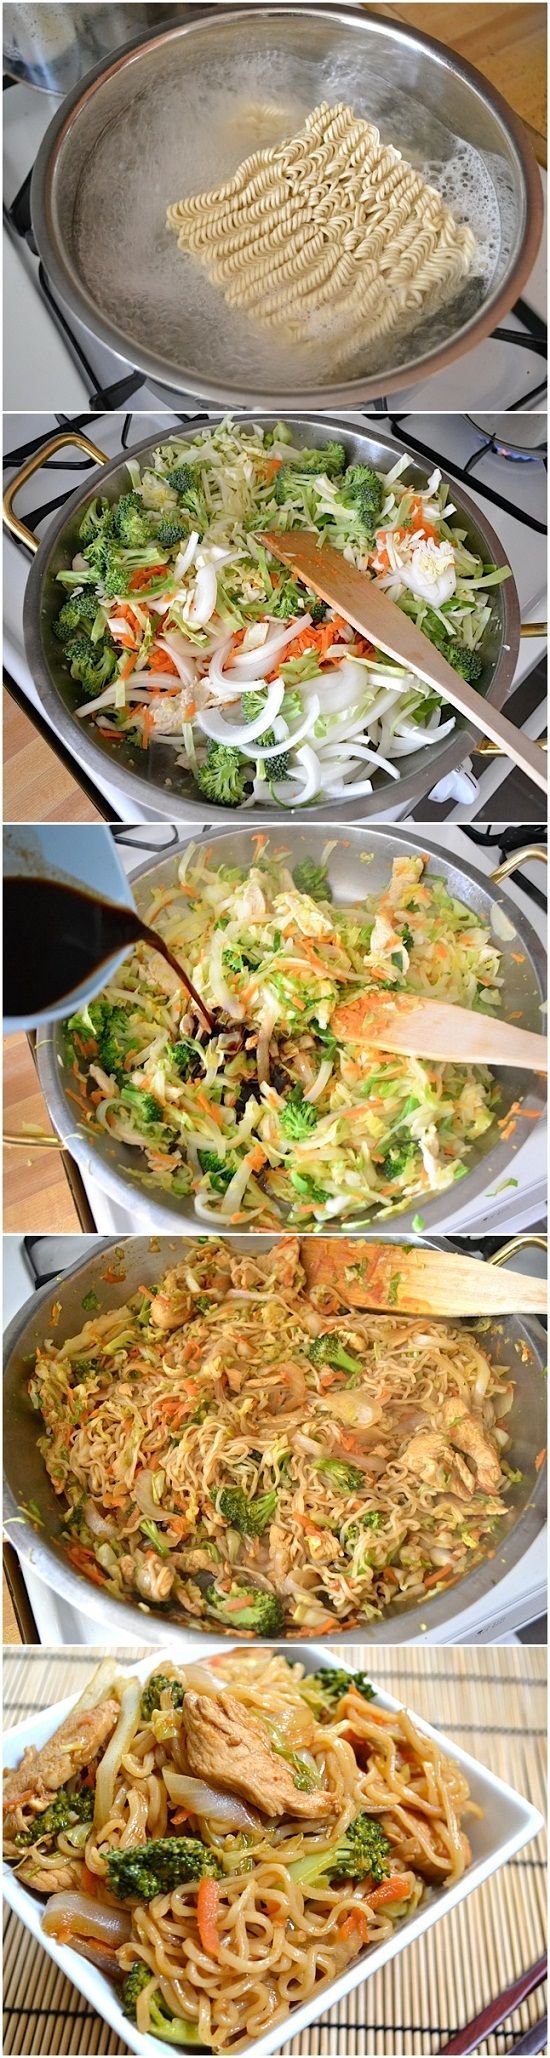 chicken yakisoba. Kids liked it!  I will make again but only use a touch of srir